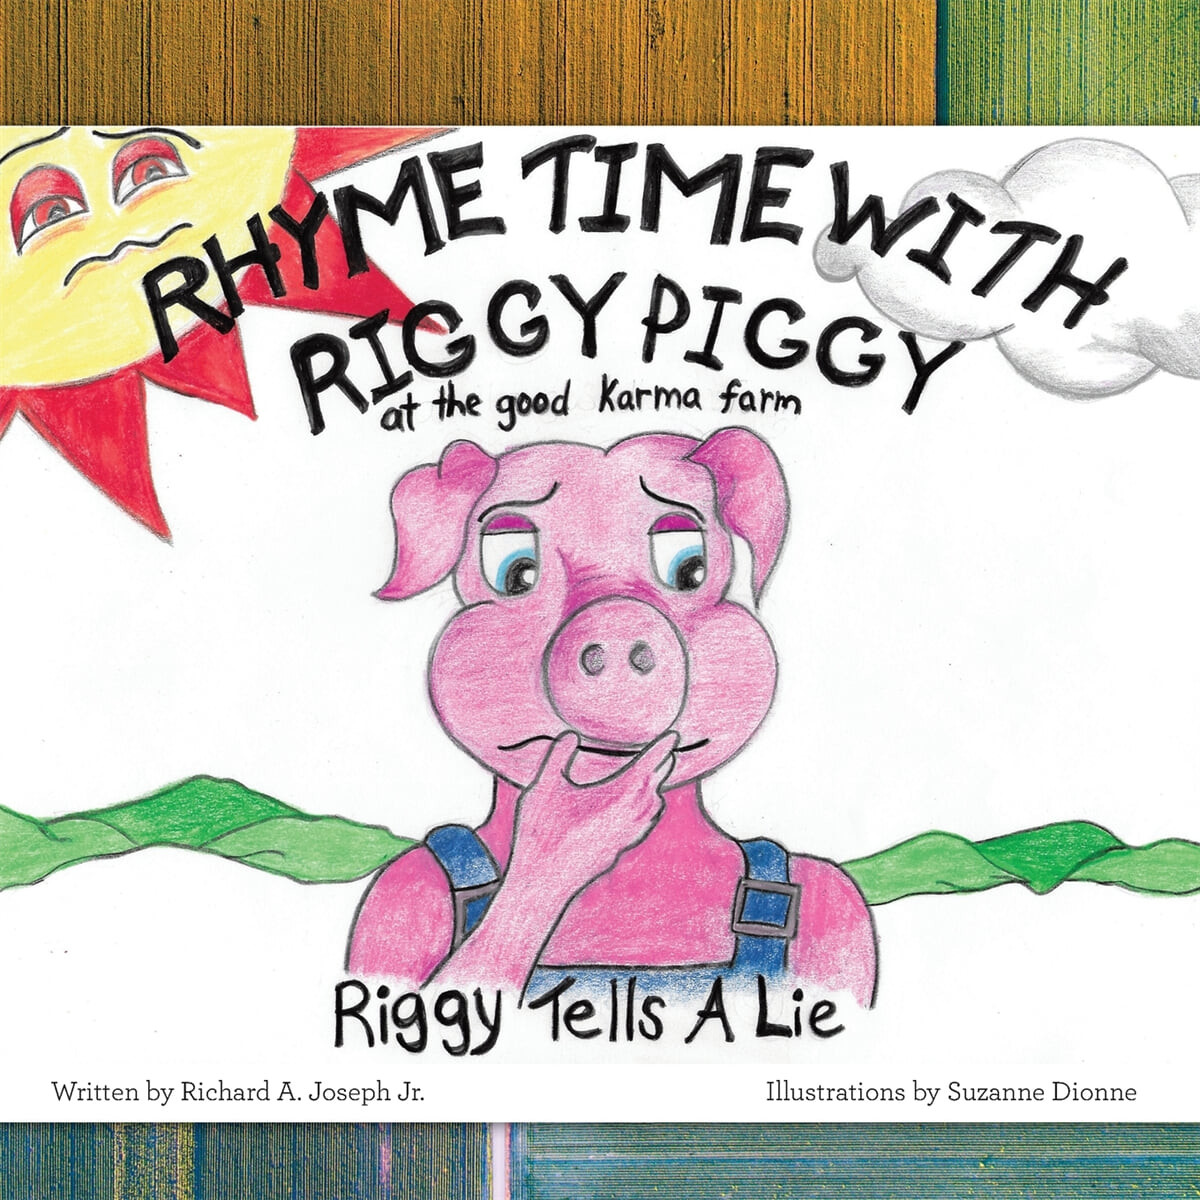 Rhyme Time with Riggy Piggy (Riggy Tells a Lie)